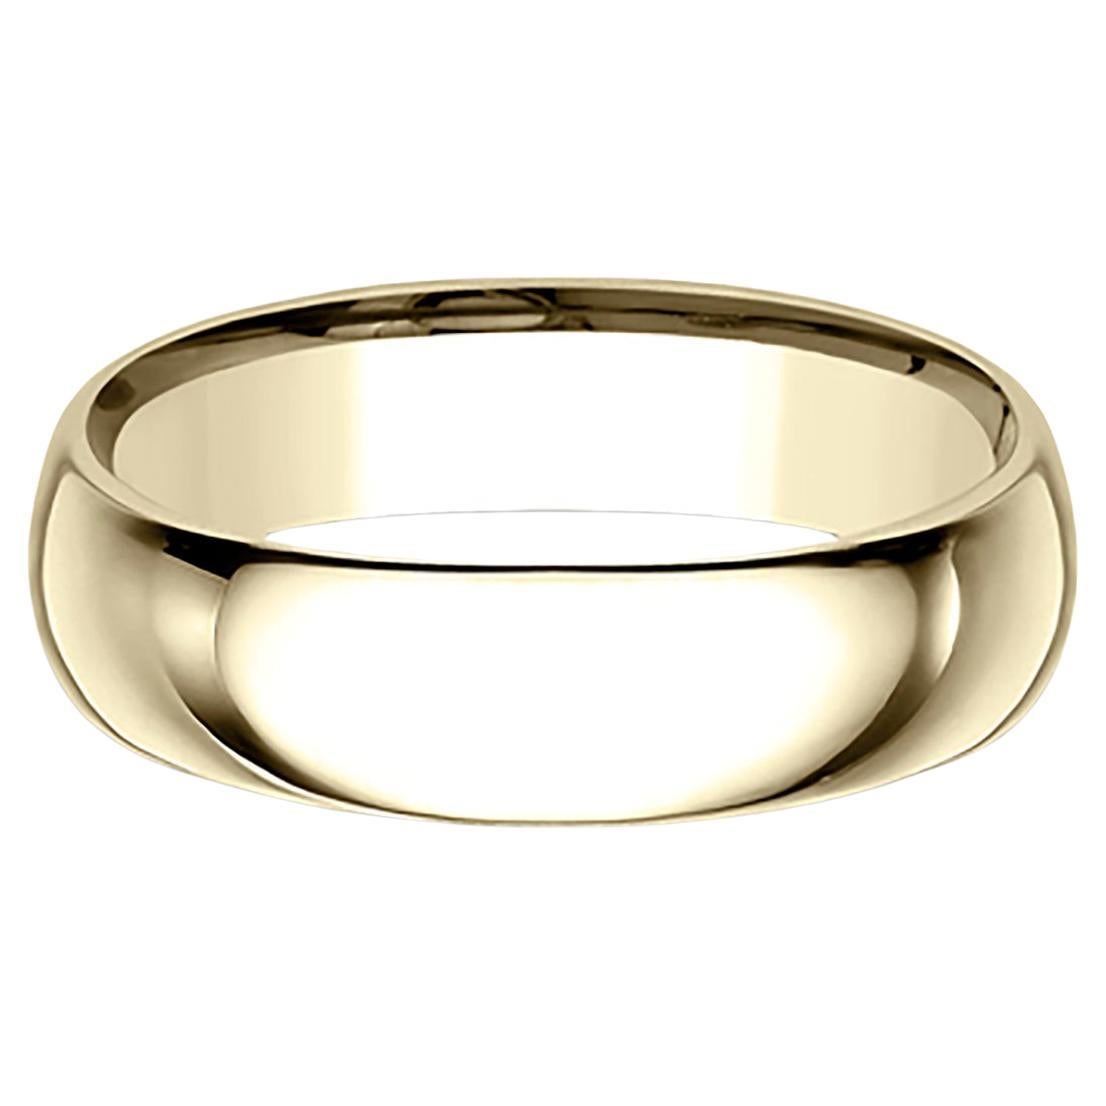 Benchmark Classic Comfort Fit Wedding Band in 14K Yellow Gold, Width 6mm For Sale